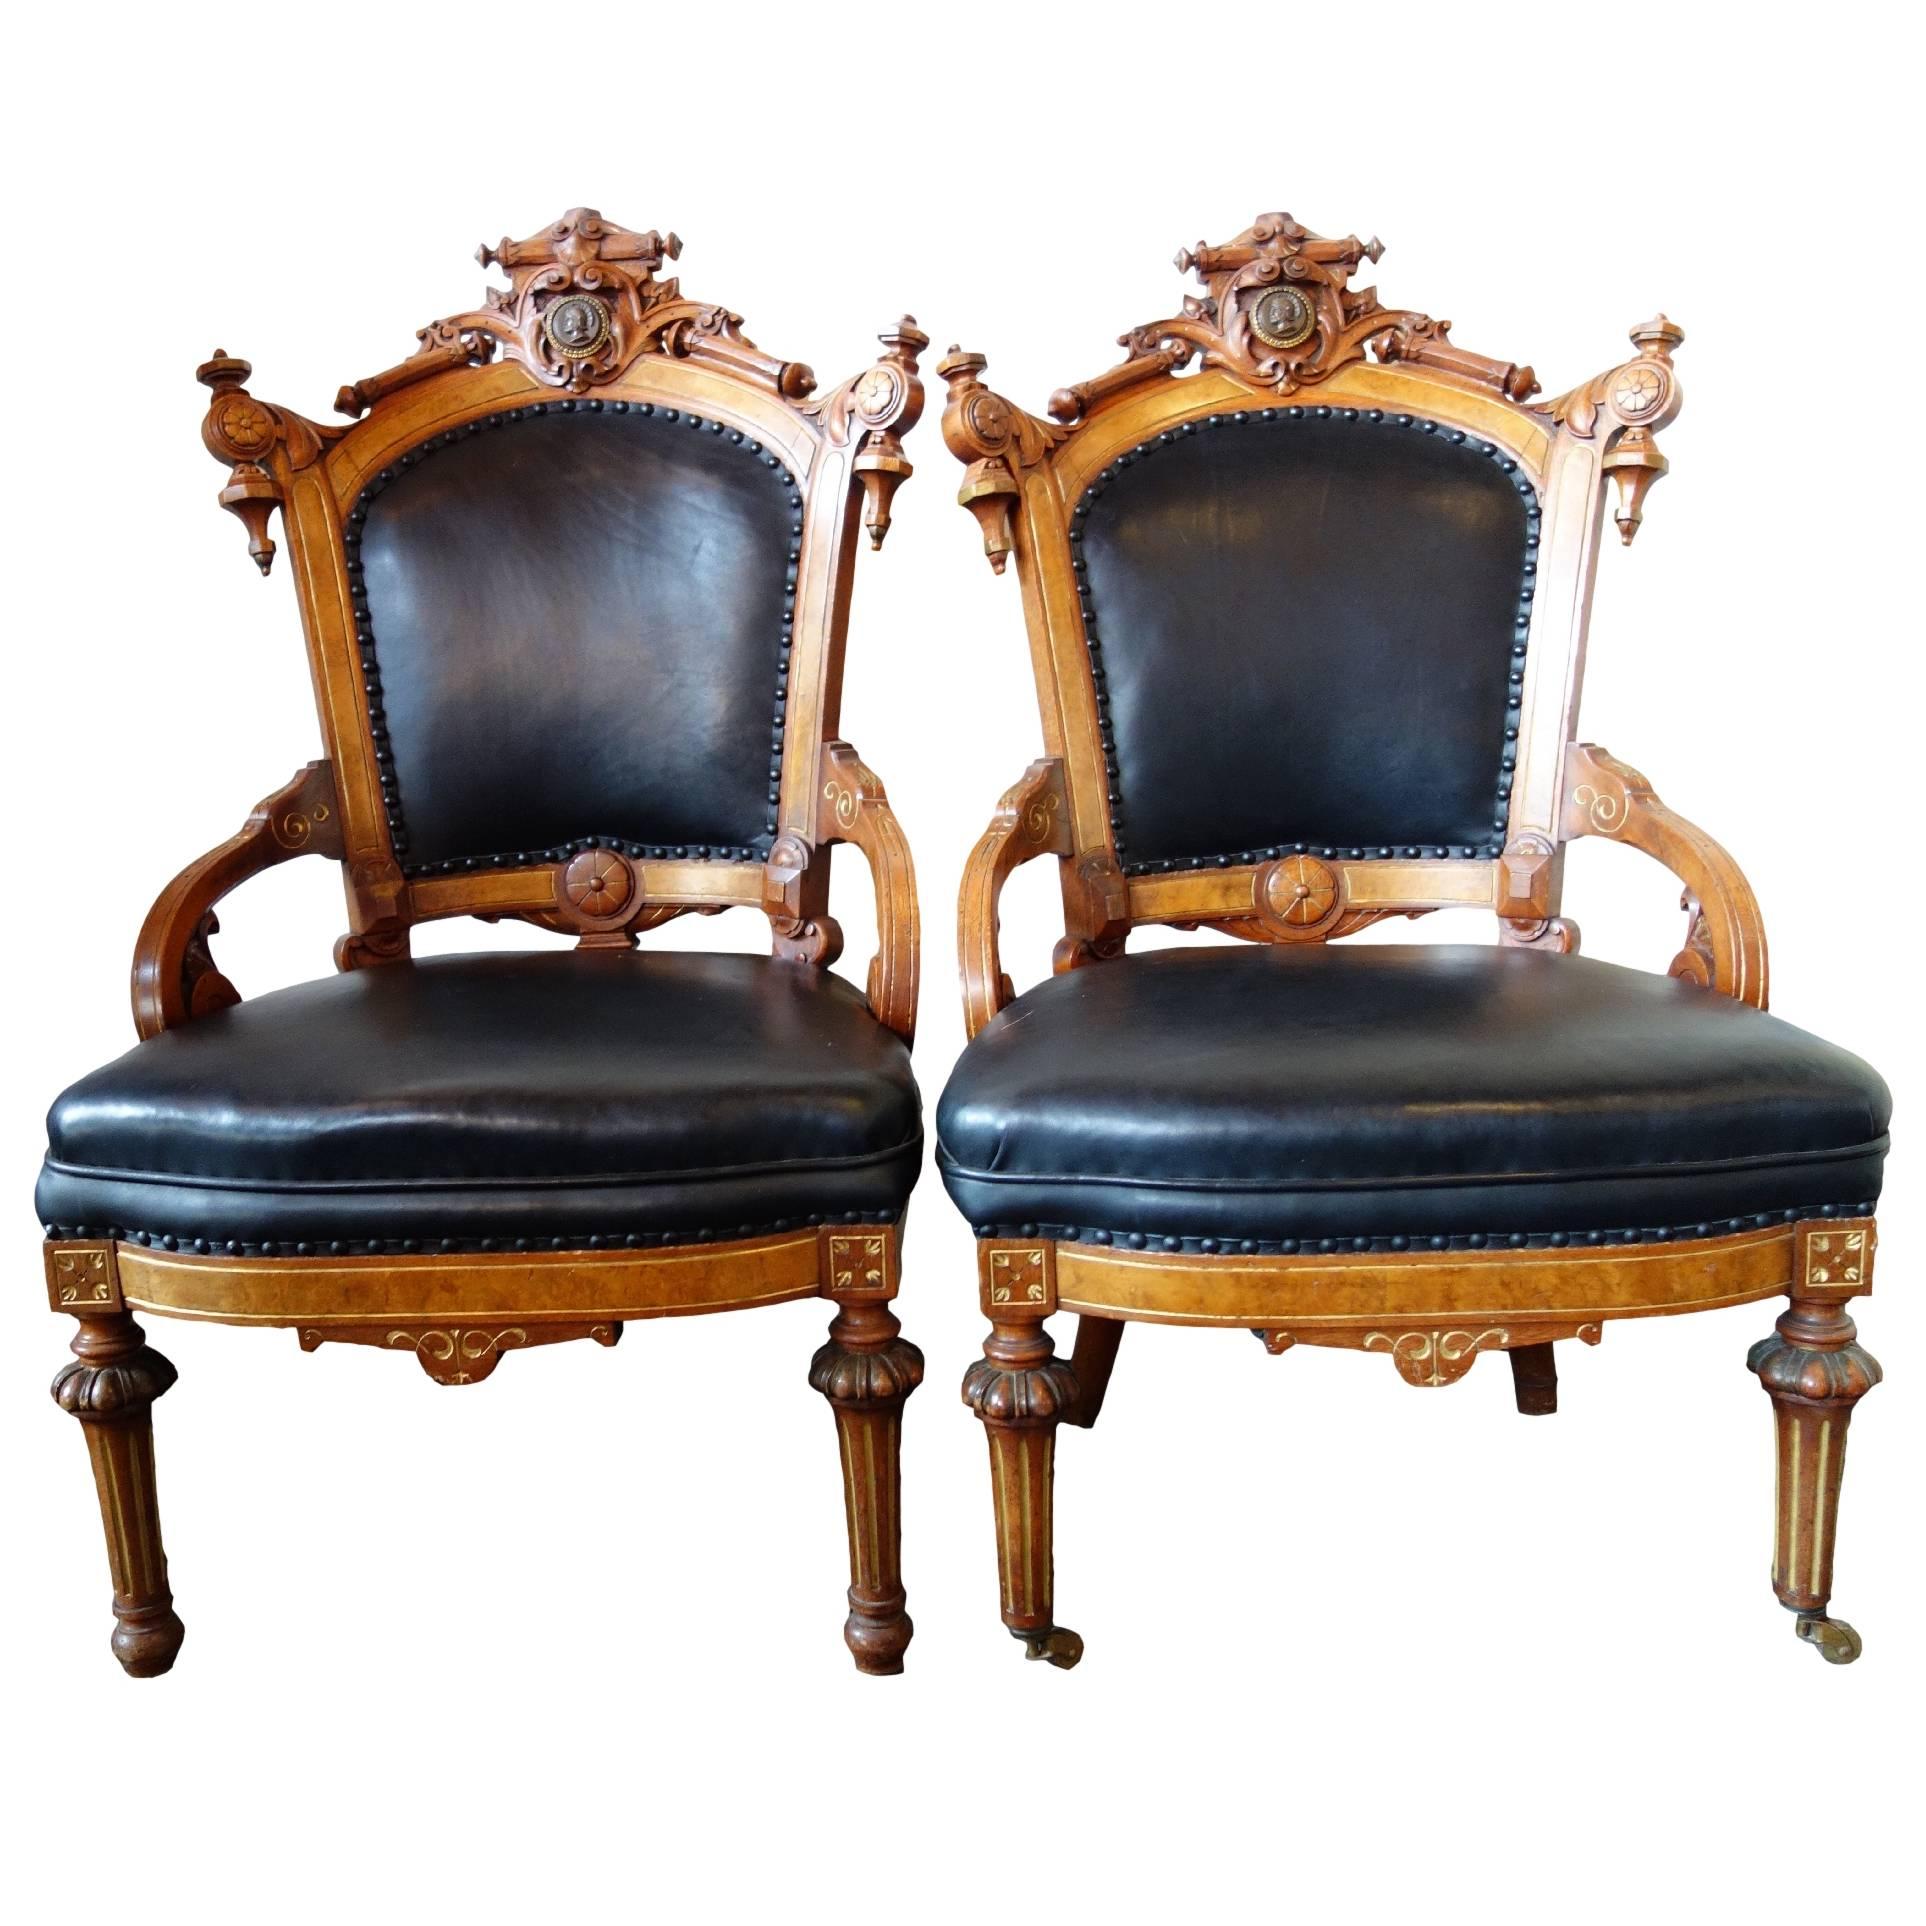 Pair of Rococo Revival John Jelliff Parlor Chairs